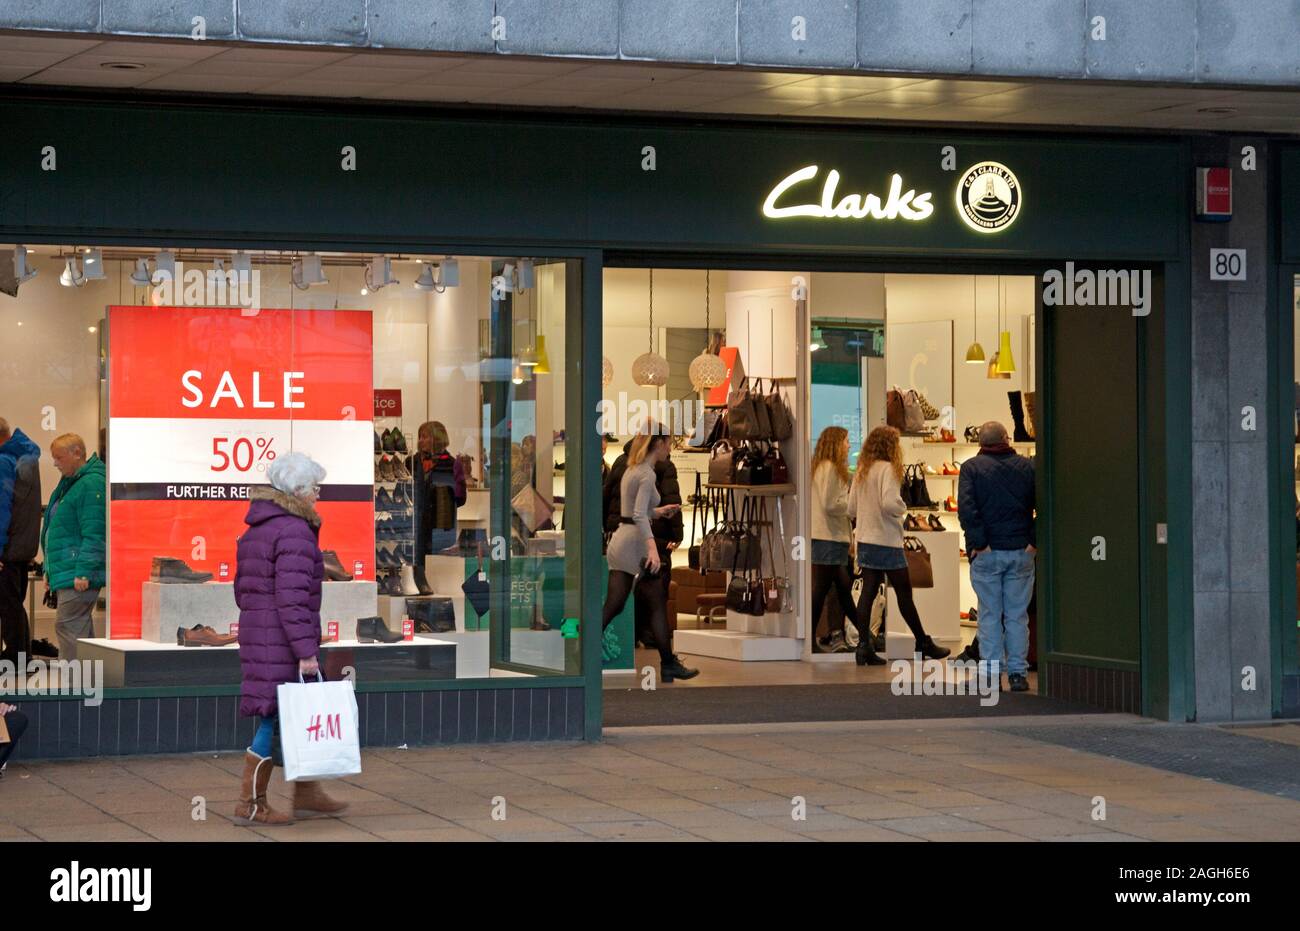 clarks princes street opening hours off 